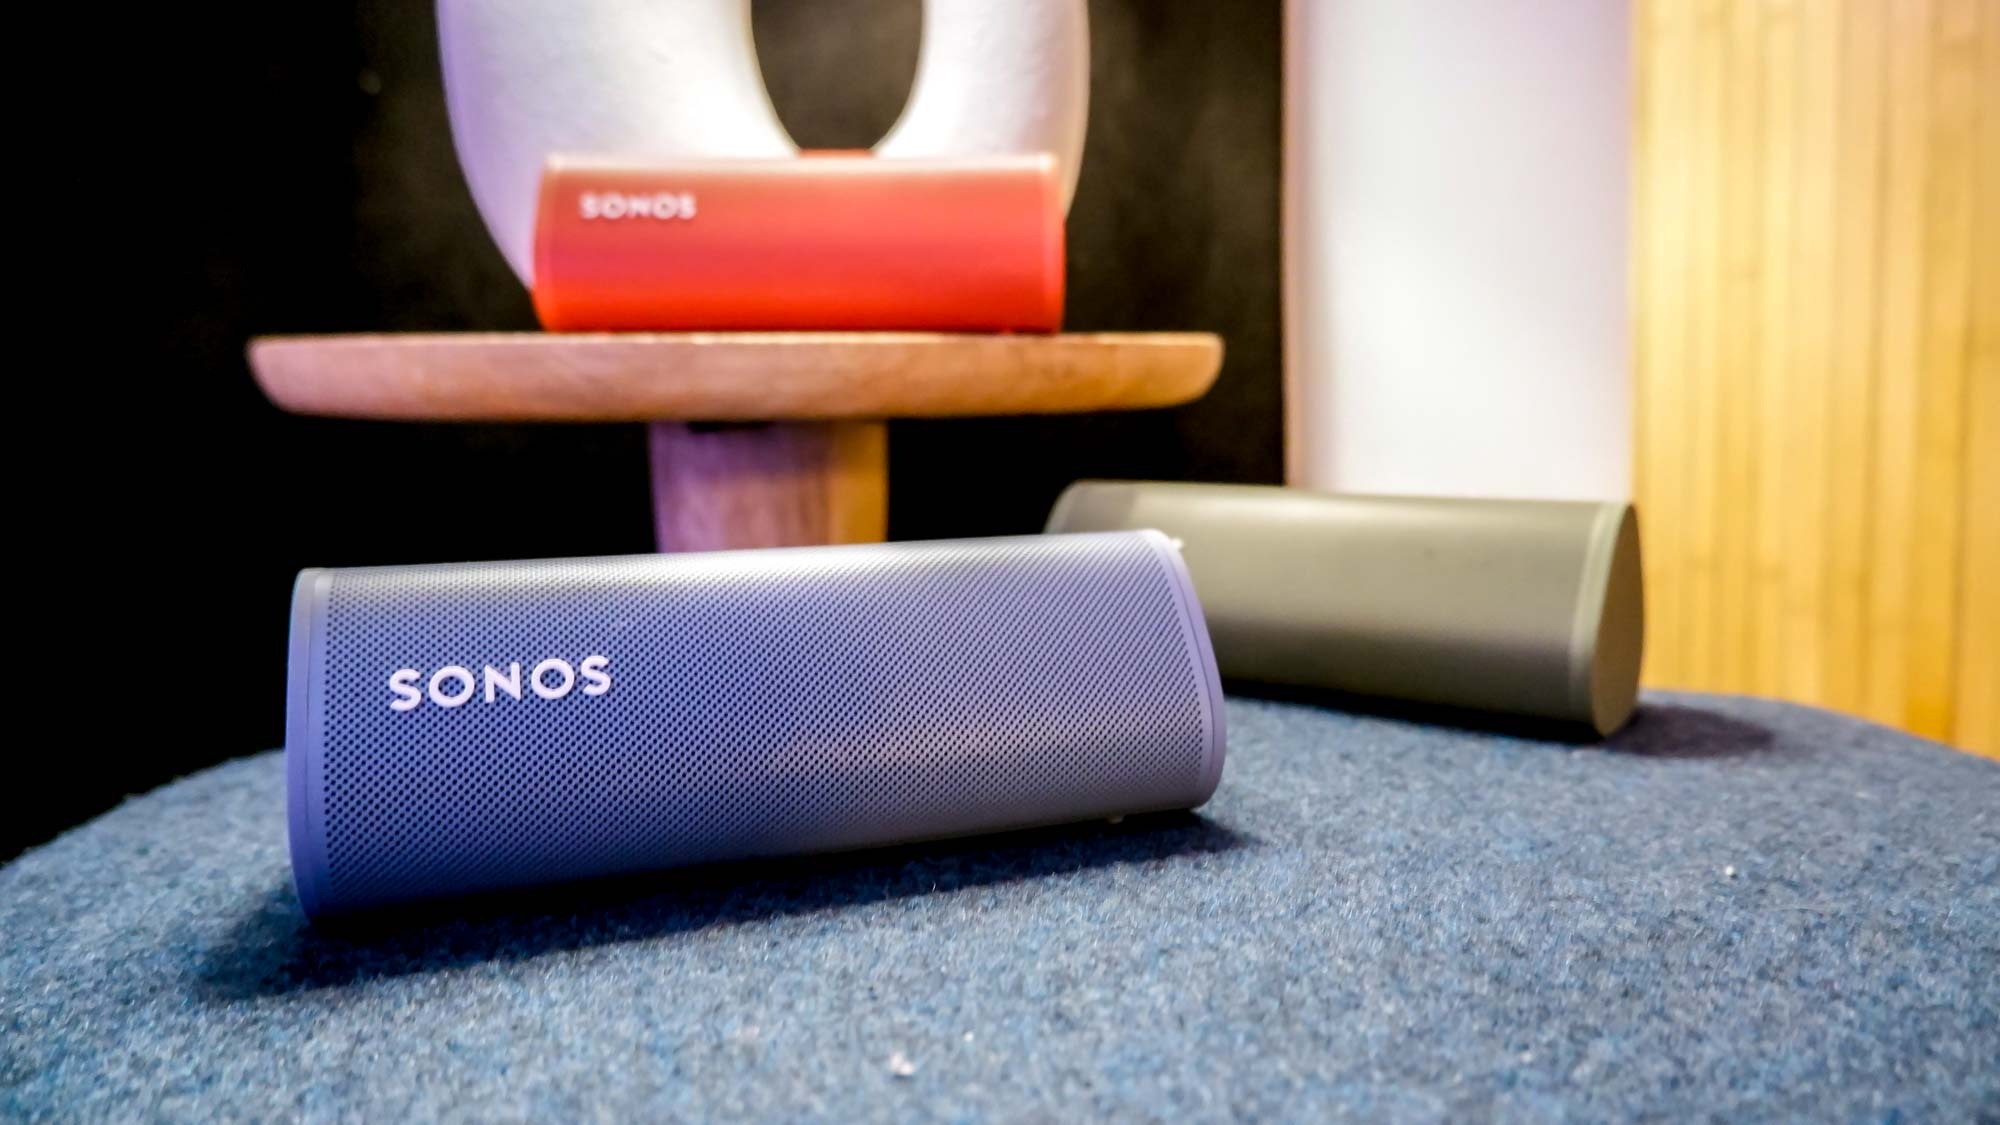 Sonos Roam gets set for summer with three new colors